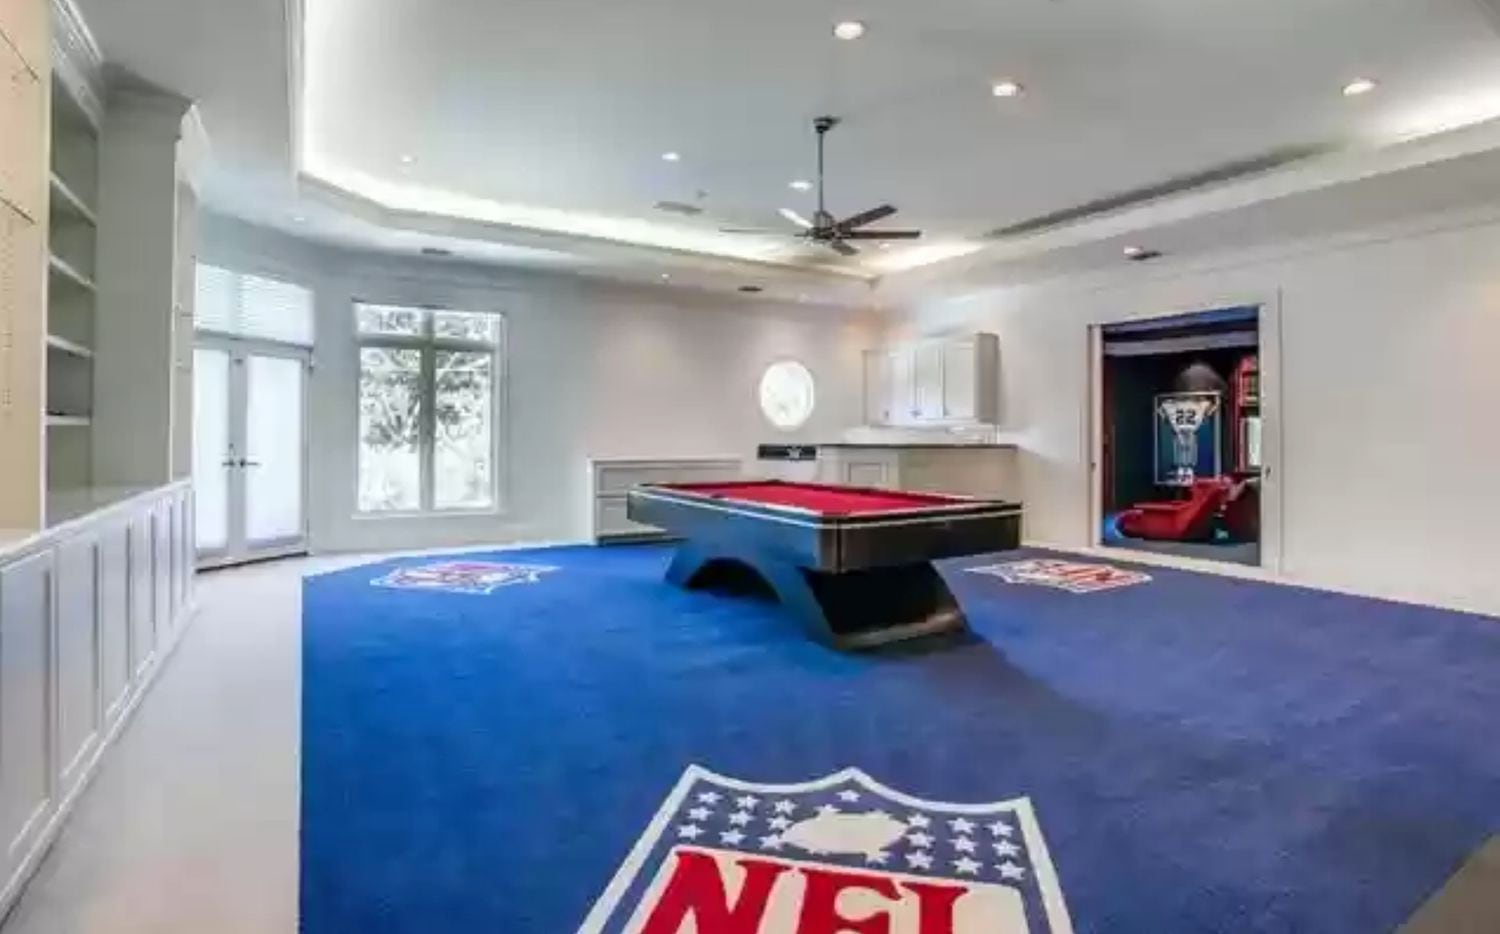 The game room in the just sold Addison mansion.